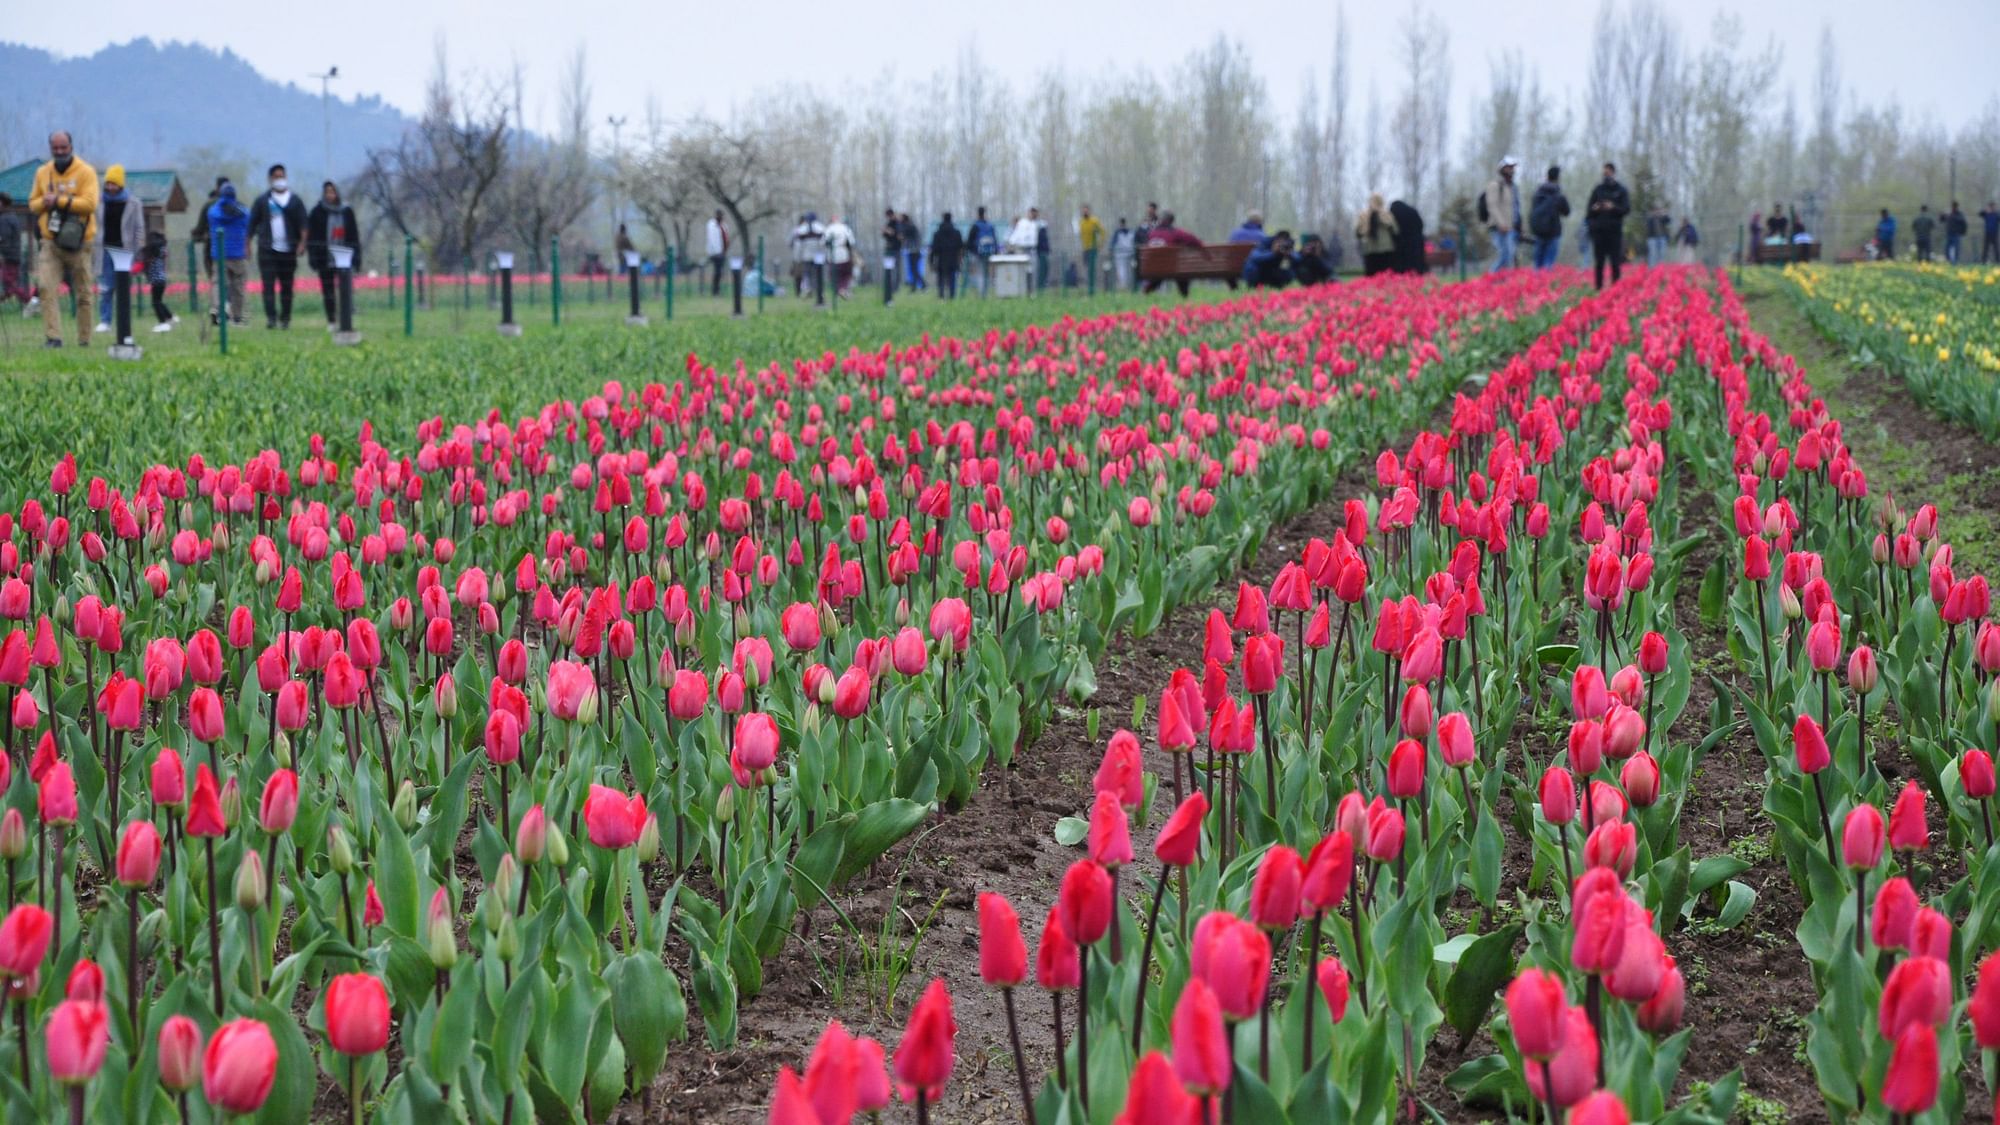 The garden will see over 15 lakh flowers of more than 64 varieties of tulips in their full bloom.